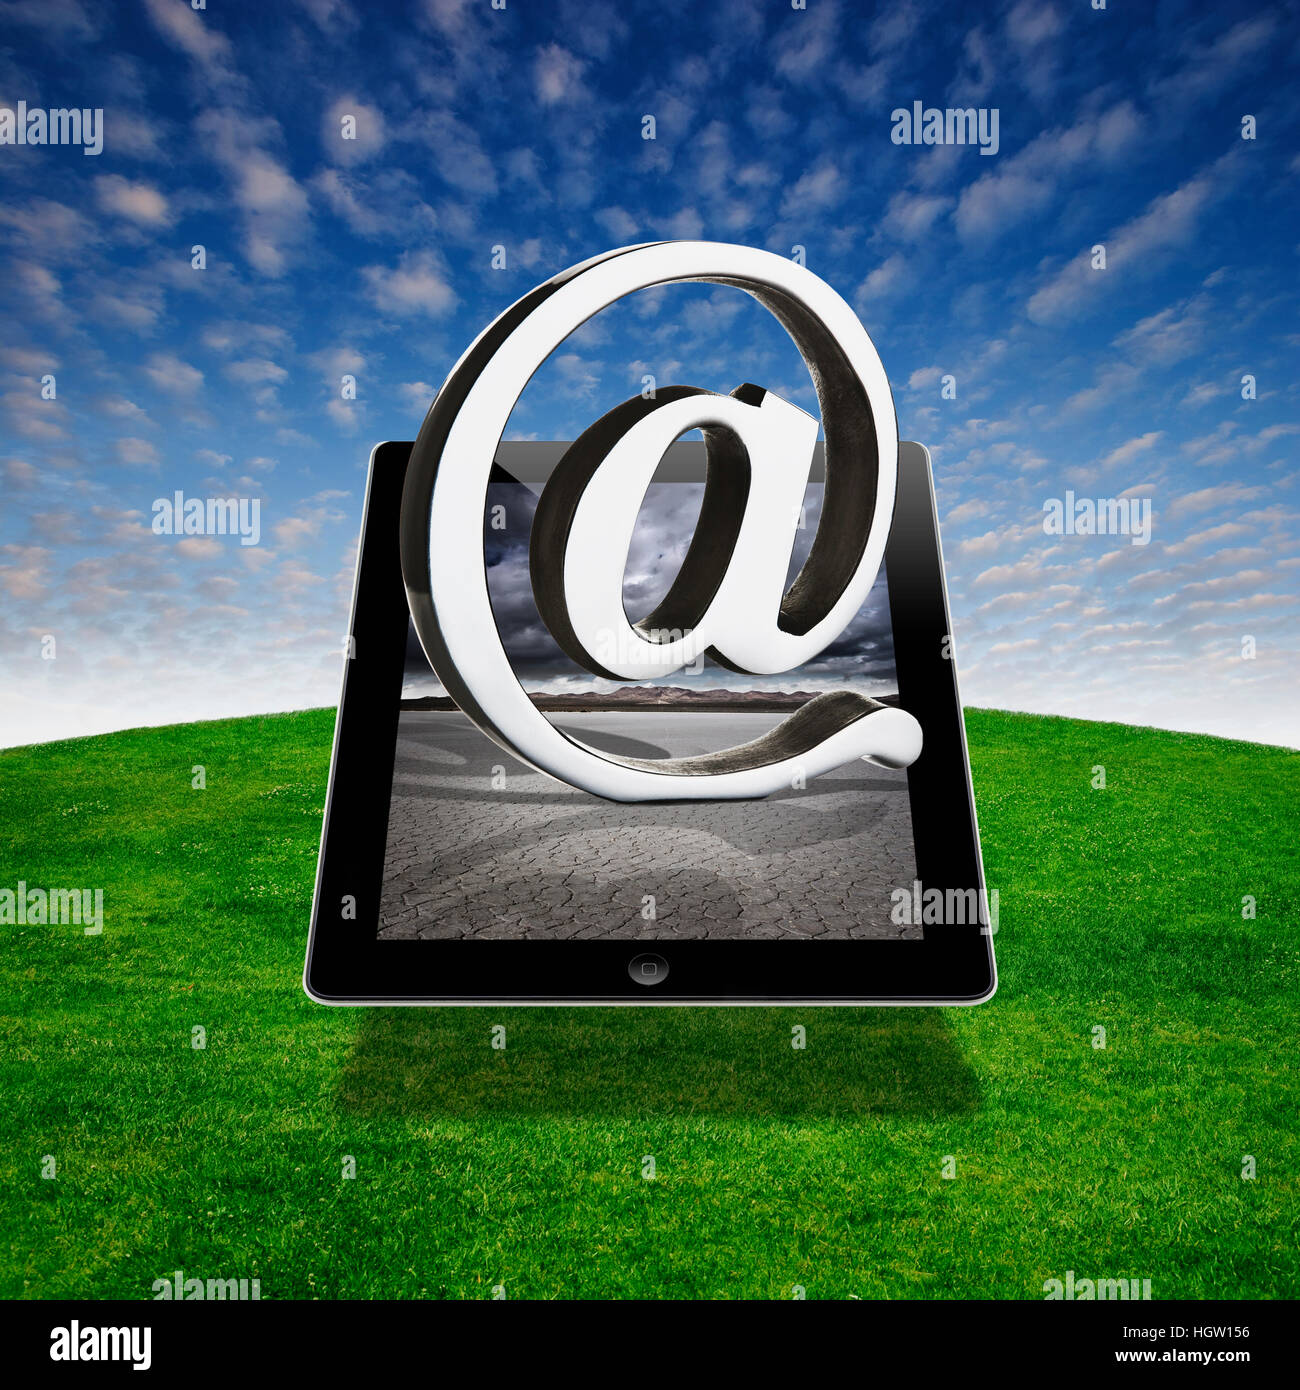 Digital Composite Of A Digital Tablet With An At Symbol Stock Photo